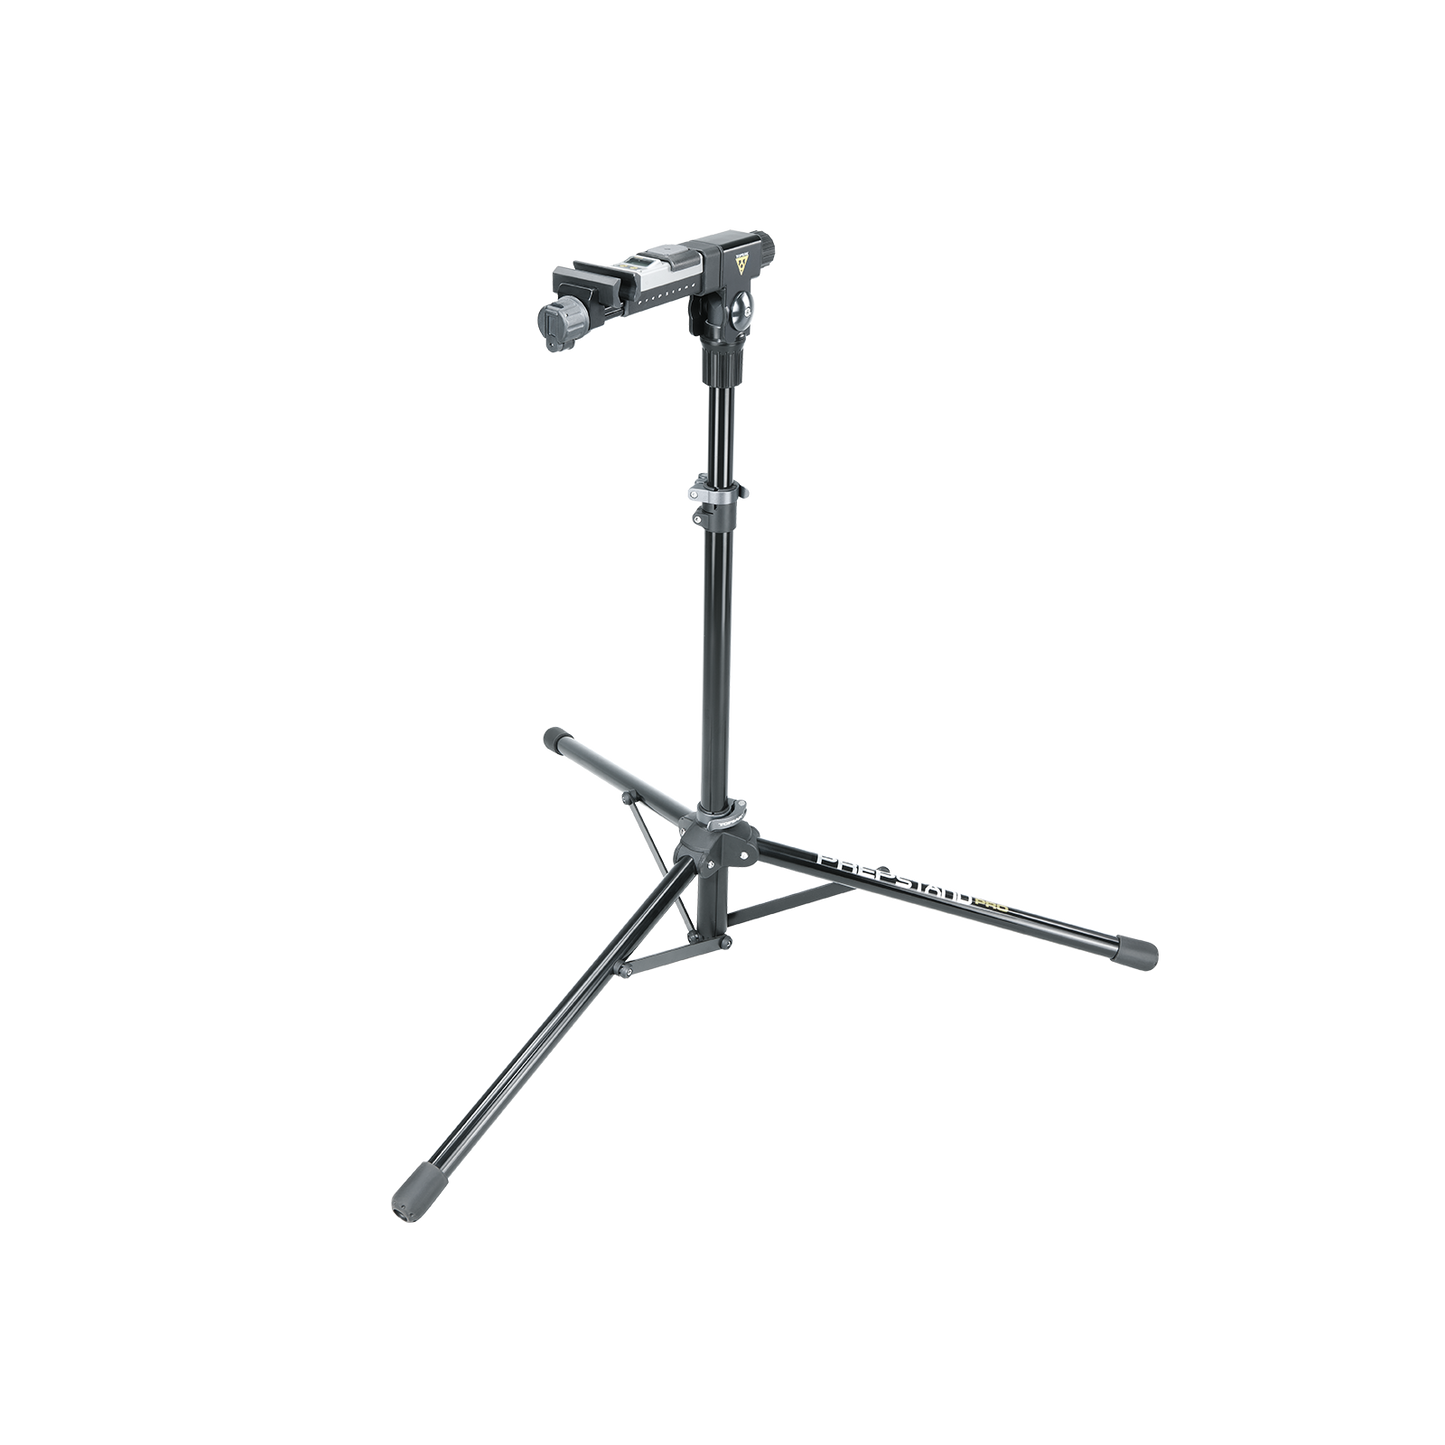 Topeak PrepStand Pro with Digital Weight Scale Workstand